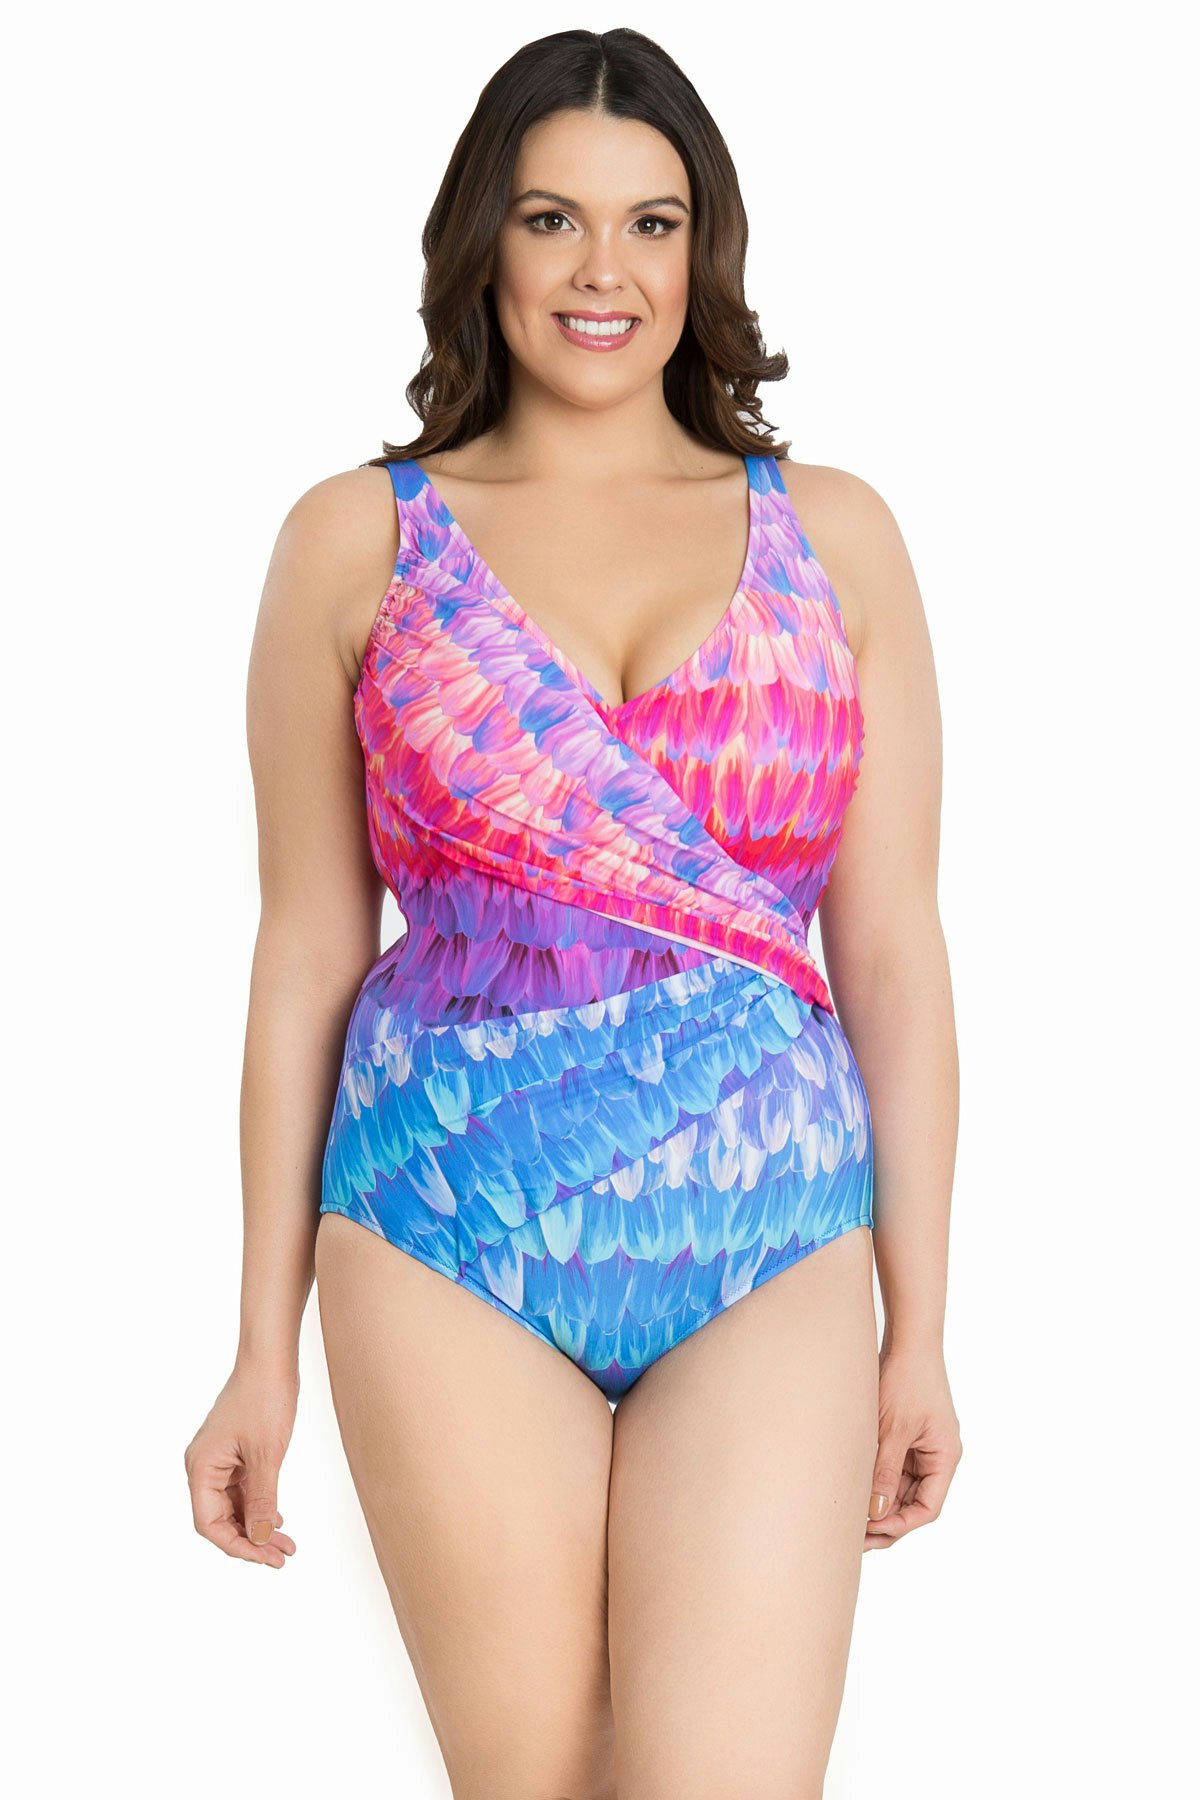 15 Swimsuit Styles For Plus Size Women With Small Boobs